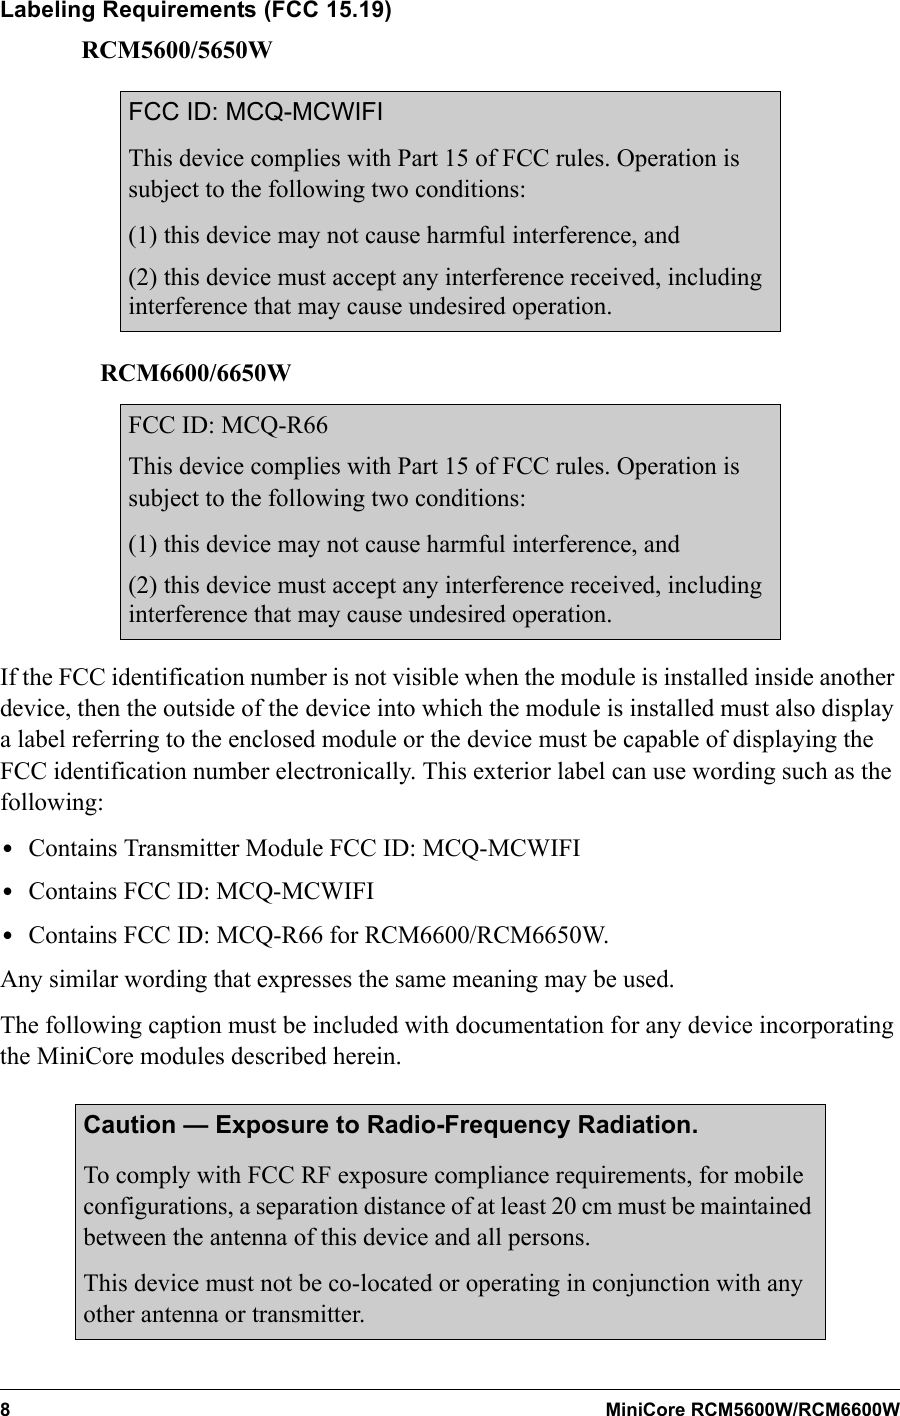 8 MiniCore RCM5600W/RCM6600WLabeling Requirements (FCC 15.19)       RCM5600/5650WFCC ID: MCQ-MCWIFIThis device complies with Part 15 of FCC rules. Operation is subject to the following two conditions:(1) this device may not cause harmful interference, and(2) this device must accept any interference received, including interference that may cause undesired operation.    RCM6600/6650WFCC ID: MCQ-R66This device complies with Part 15 of FCC rules. Operation is subject to the following two conditions:(1) this device may not cause harmful interference, and(2) this device must accept any interference received, including interference that may cause undesired operation.If the FCC identification number is not visible when the module is installed inside another device, then the outside of the device into which the module is installed must also display a label referring to the enclosed module or the device must be capable of displaying the FCC identification number electronically. This exterior label can use wording such as the following: •Contains Transmitter Module FCC ID: MCQ-MCWIFI •Contains FCC ID: MCQ-MCWIFI•Contains FCC ID: MCQ-R66 for RCM6600/RCM6650W. Any similar wording that expresses the same meaning may be used.The following caption must be included with documentation for any device incorporating the MiniCore modules described herein.Caution — Exposure to Radio-Frequency Radiation.To comply with FCC RF exposure compliance requirements, for mobile configurations, a separation distance of at least 20 cm must be maintained between the antenna of this device and all persons. This device must not be co-located or operating in conjunction with any other antenna or transmitter.